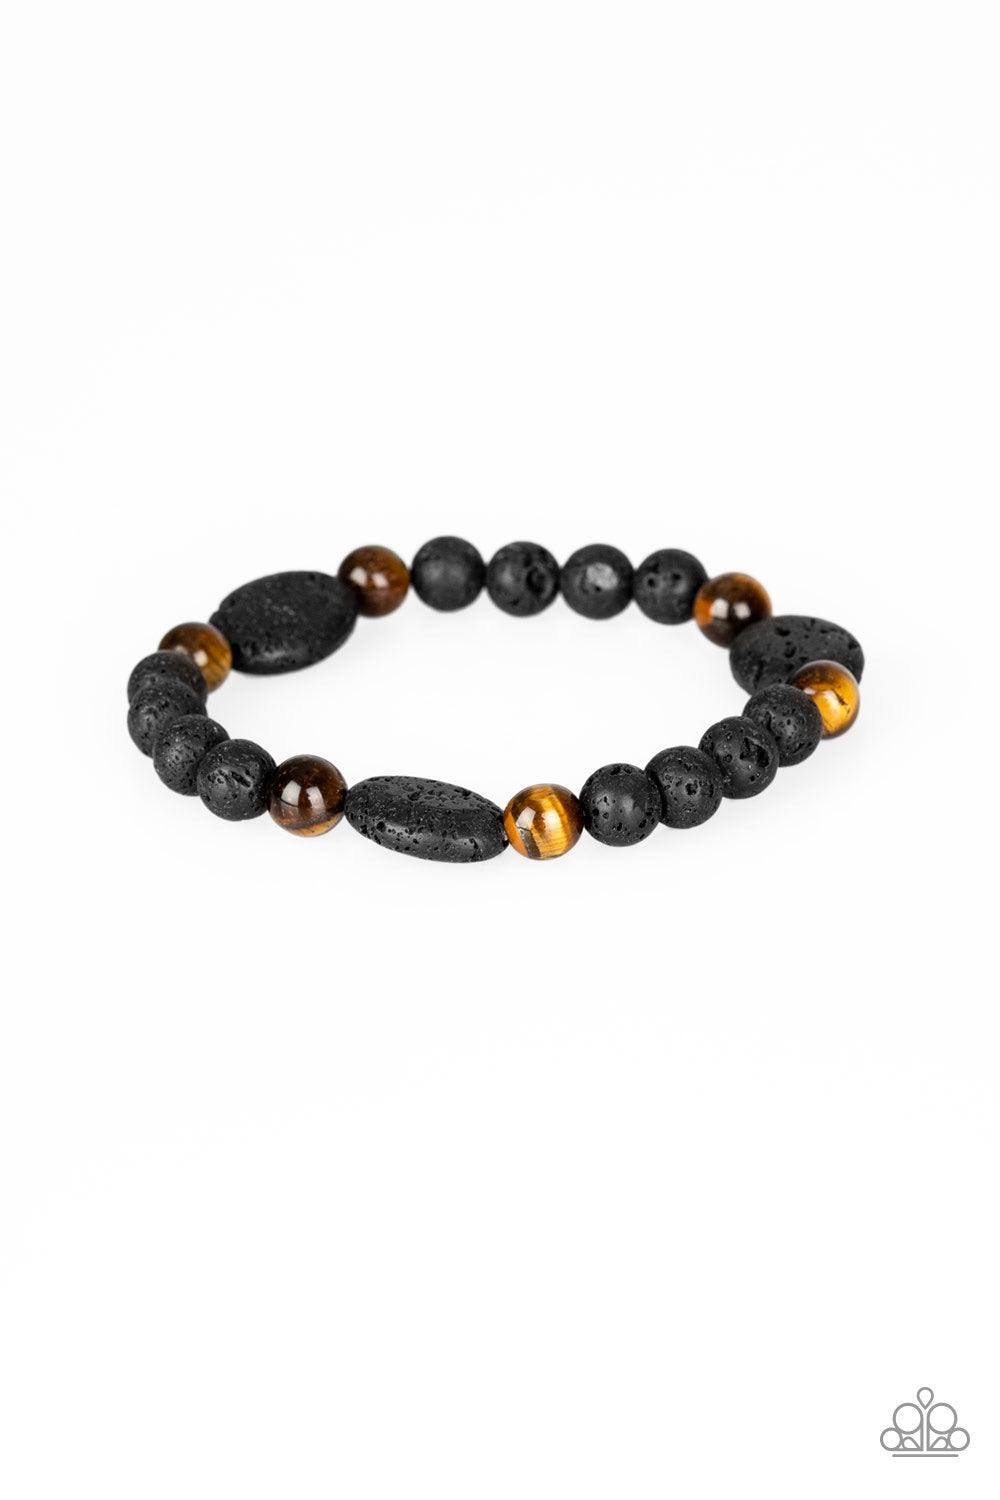 Paparazzi Accessories A Hundred And Zen Percent - Brown A collection of black lava rocks and earthy Tiger's Eye stone beads are threaded along a stretchy band around the wrist for a seasonal look. Jewelry